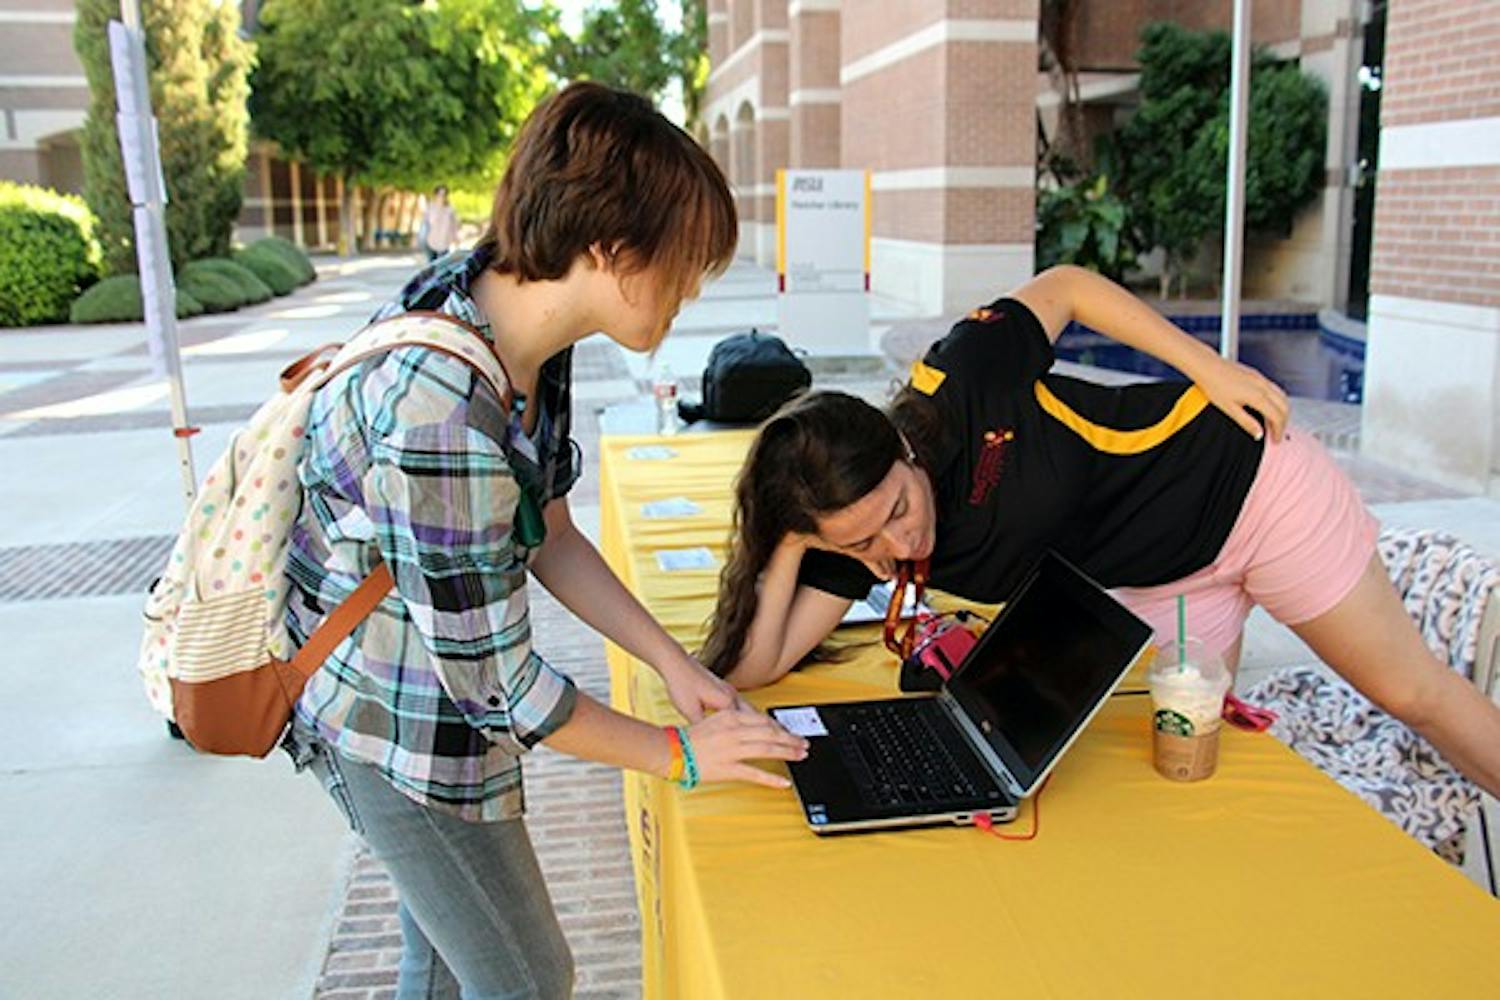 USG students representative Rachael Tashbook, right, helps analytics and global logistics junior Amanda Benjamin register to vote. The deadline for registration is Oct. 6, so the USG is encouraging students to sign up soon. (Photo by Tynin Fries)